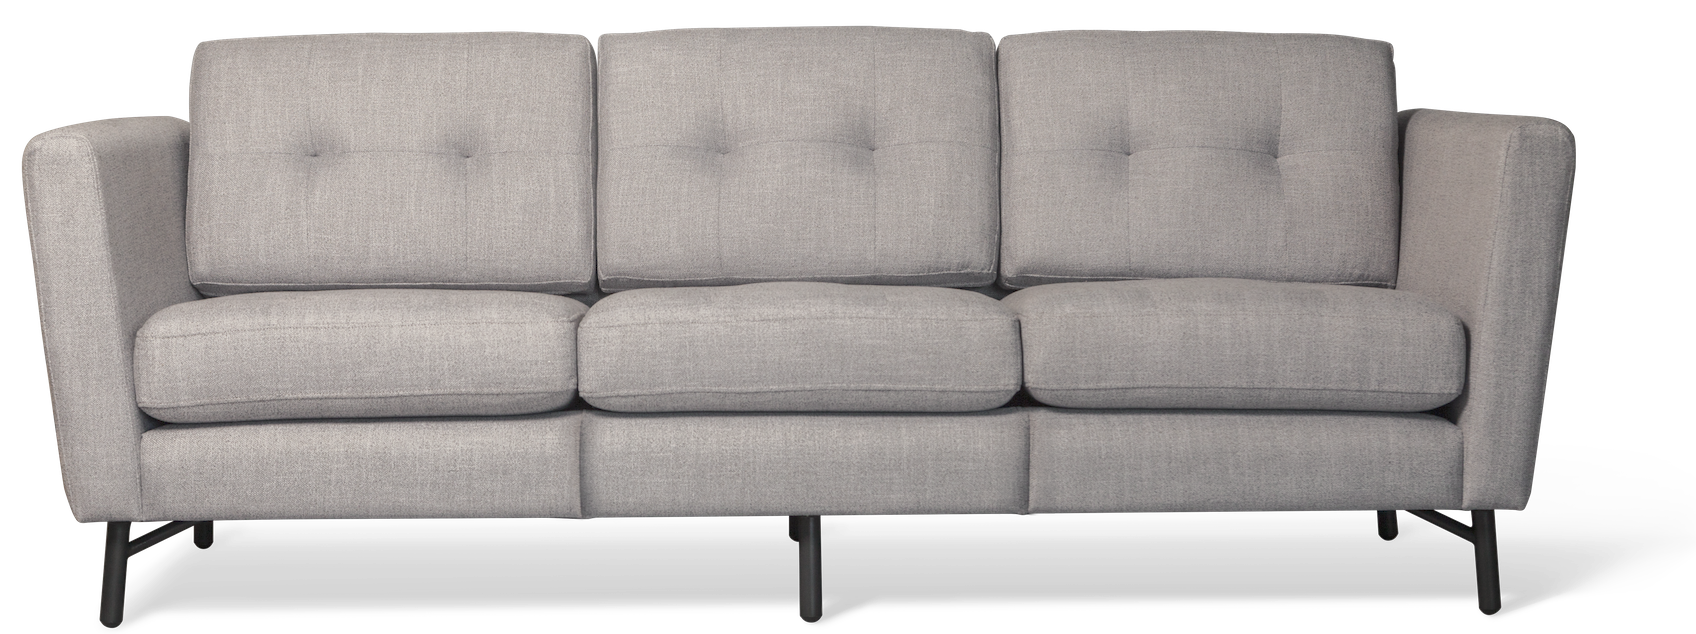 Download Download Couch Download Free Image HQ PNG Image | FreePNGImg